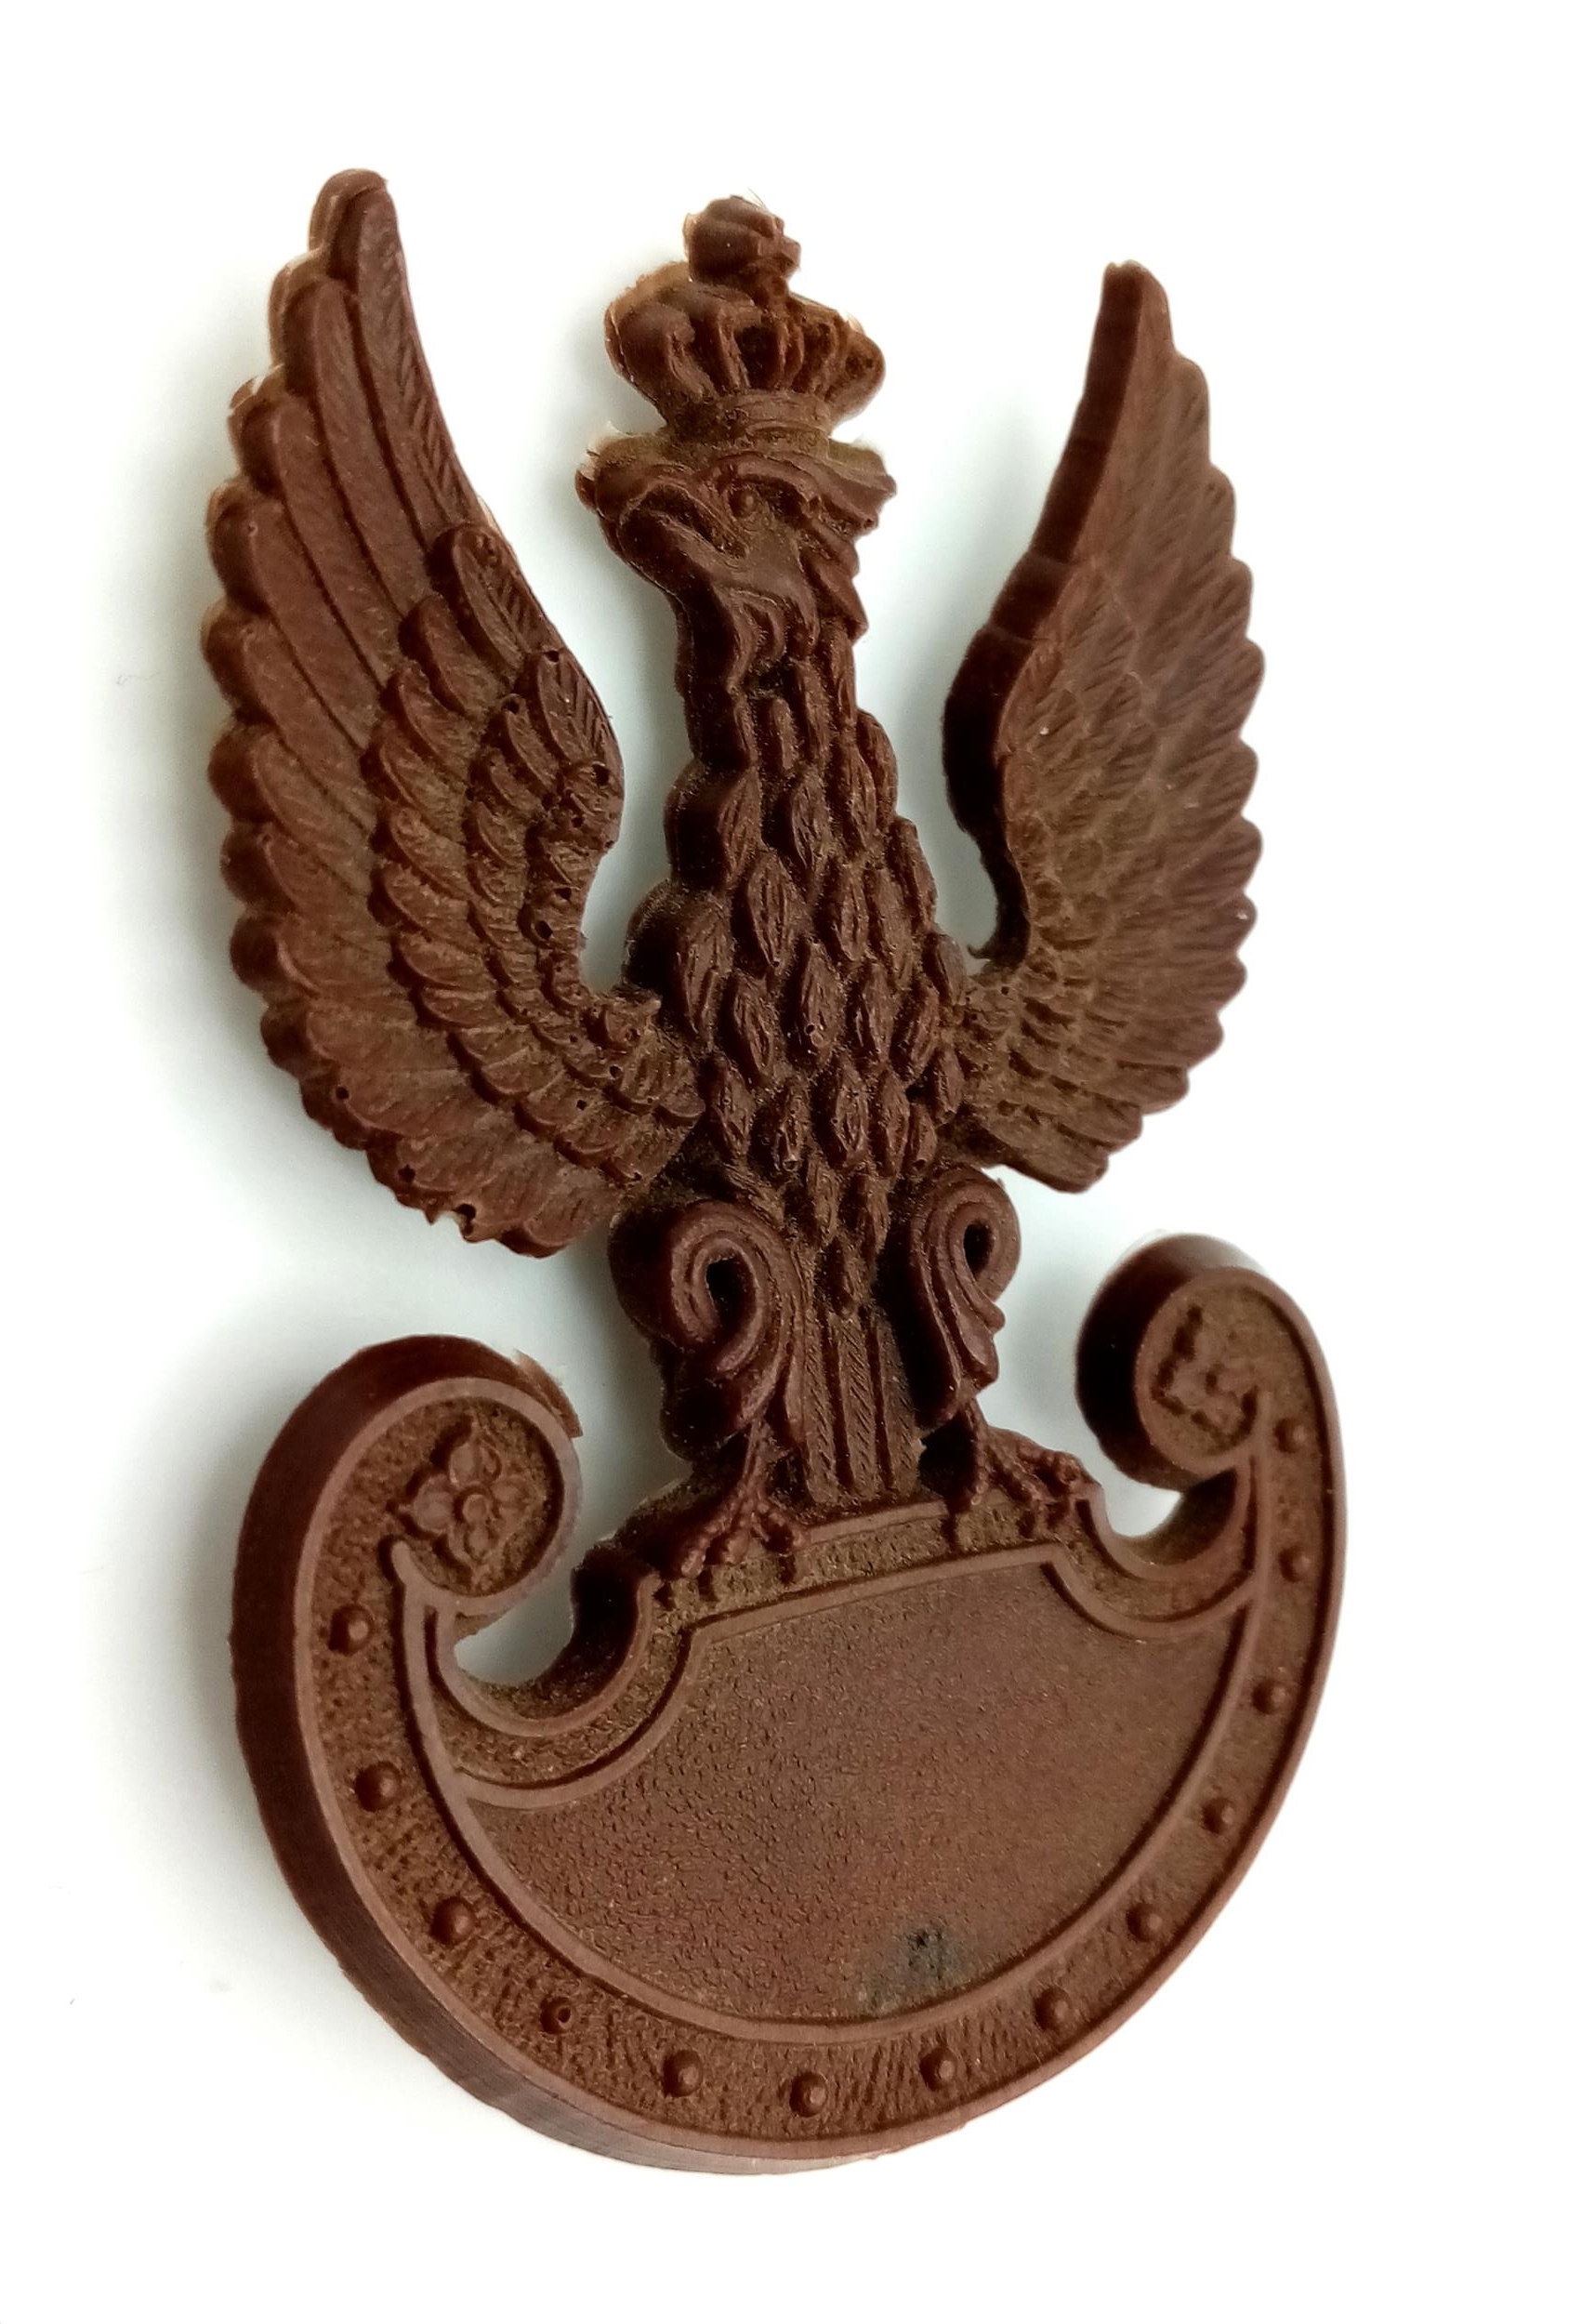 WW2 Plastic (Cellulose Acetate) Economy 1944 Issue Brown Cap Badge. Maker Marked: A. Stanley & - Image 2 of 3